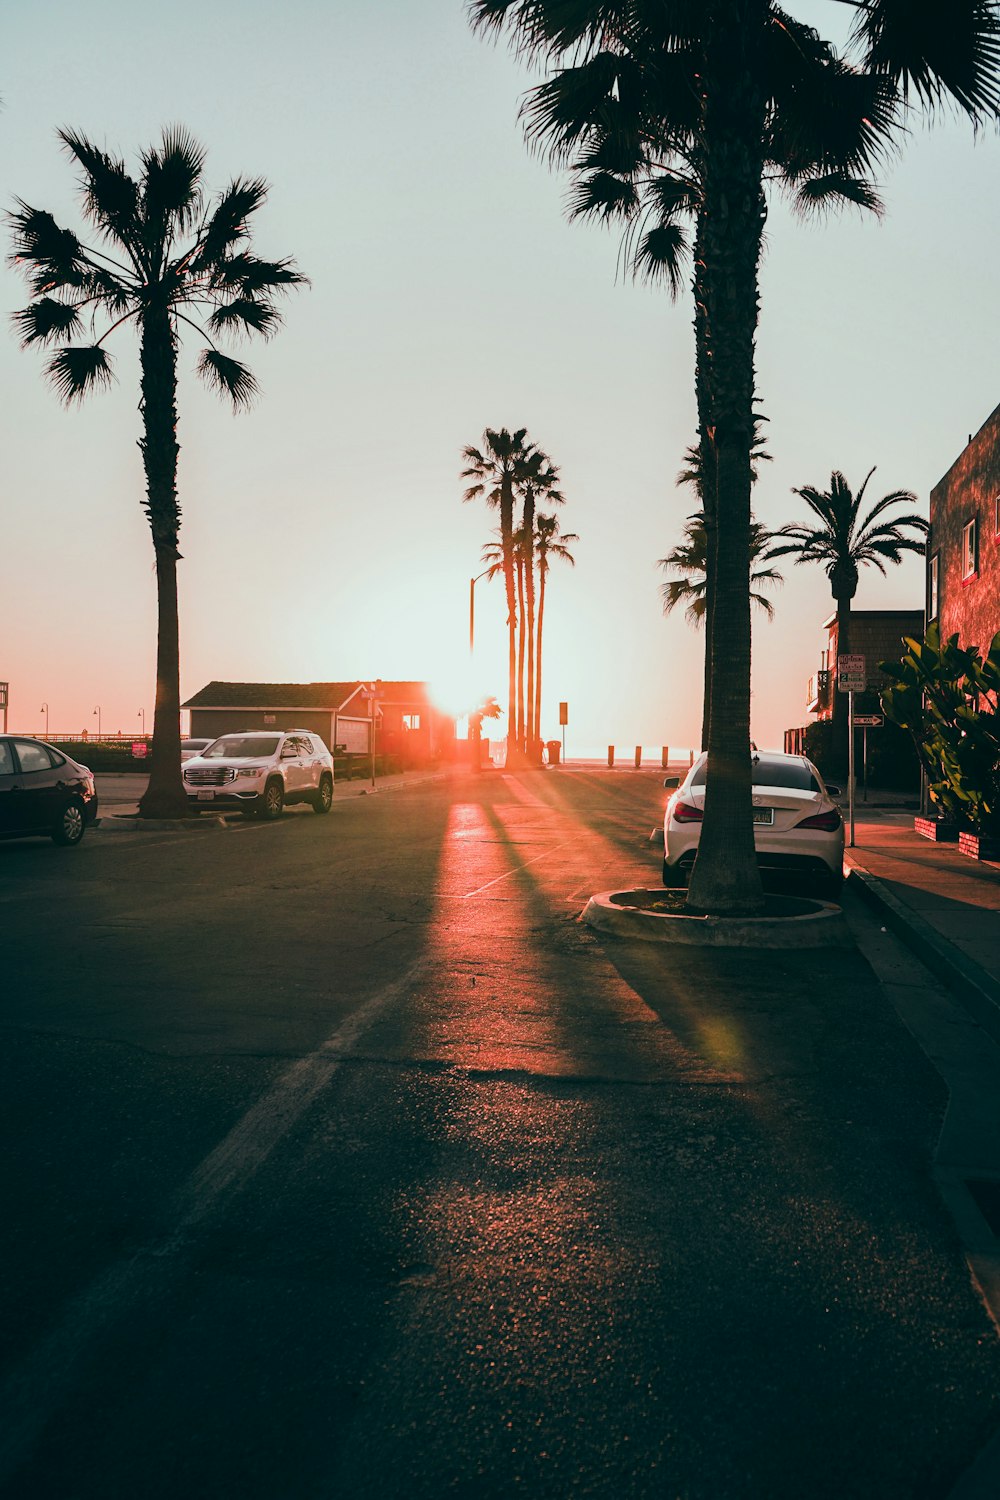 cars parked on the side of the road during sunset